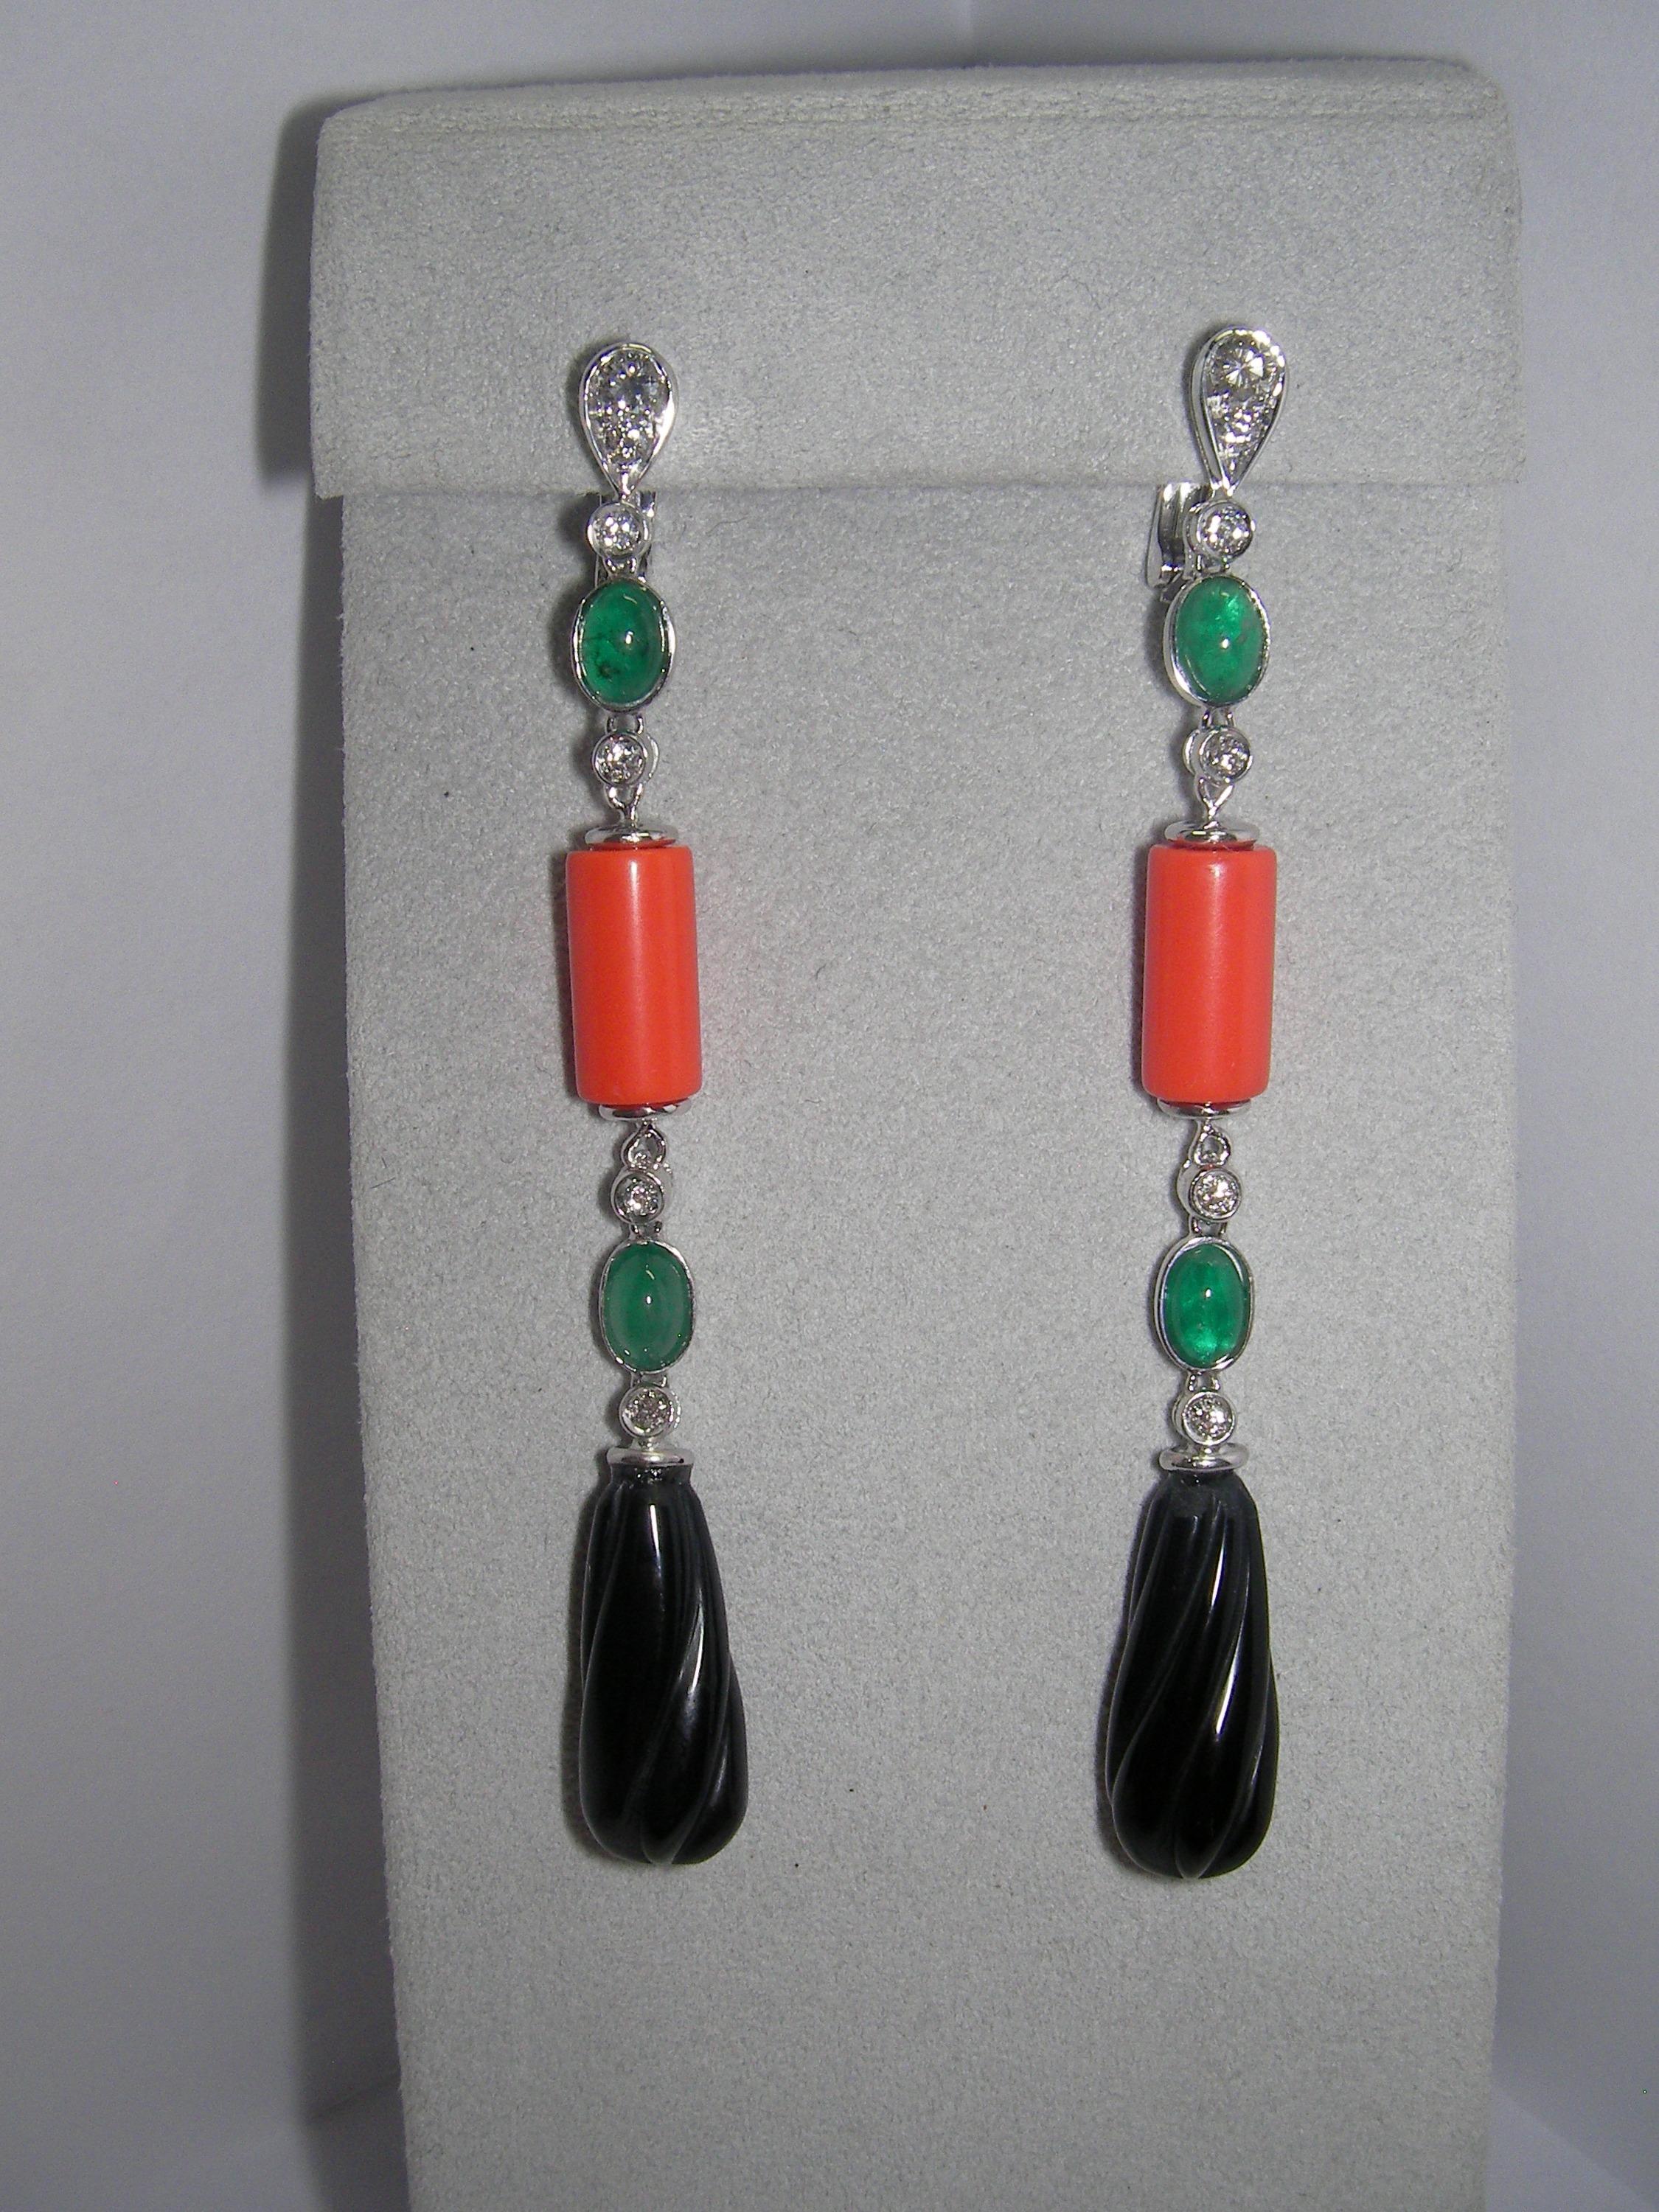 These 18 Karat White Gold Dangle Earrings will steal the show! 
Each earring features a diamond based, followed by a strand of two cabochon oval cut Emeralds, a cylindric recon Coral and pear-shaped carved Onyx. 
This is the perfect gift for your